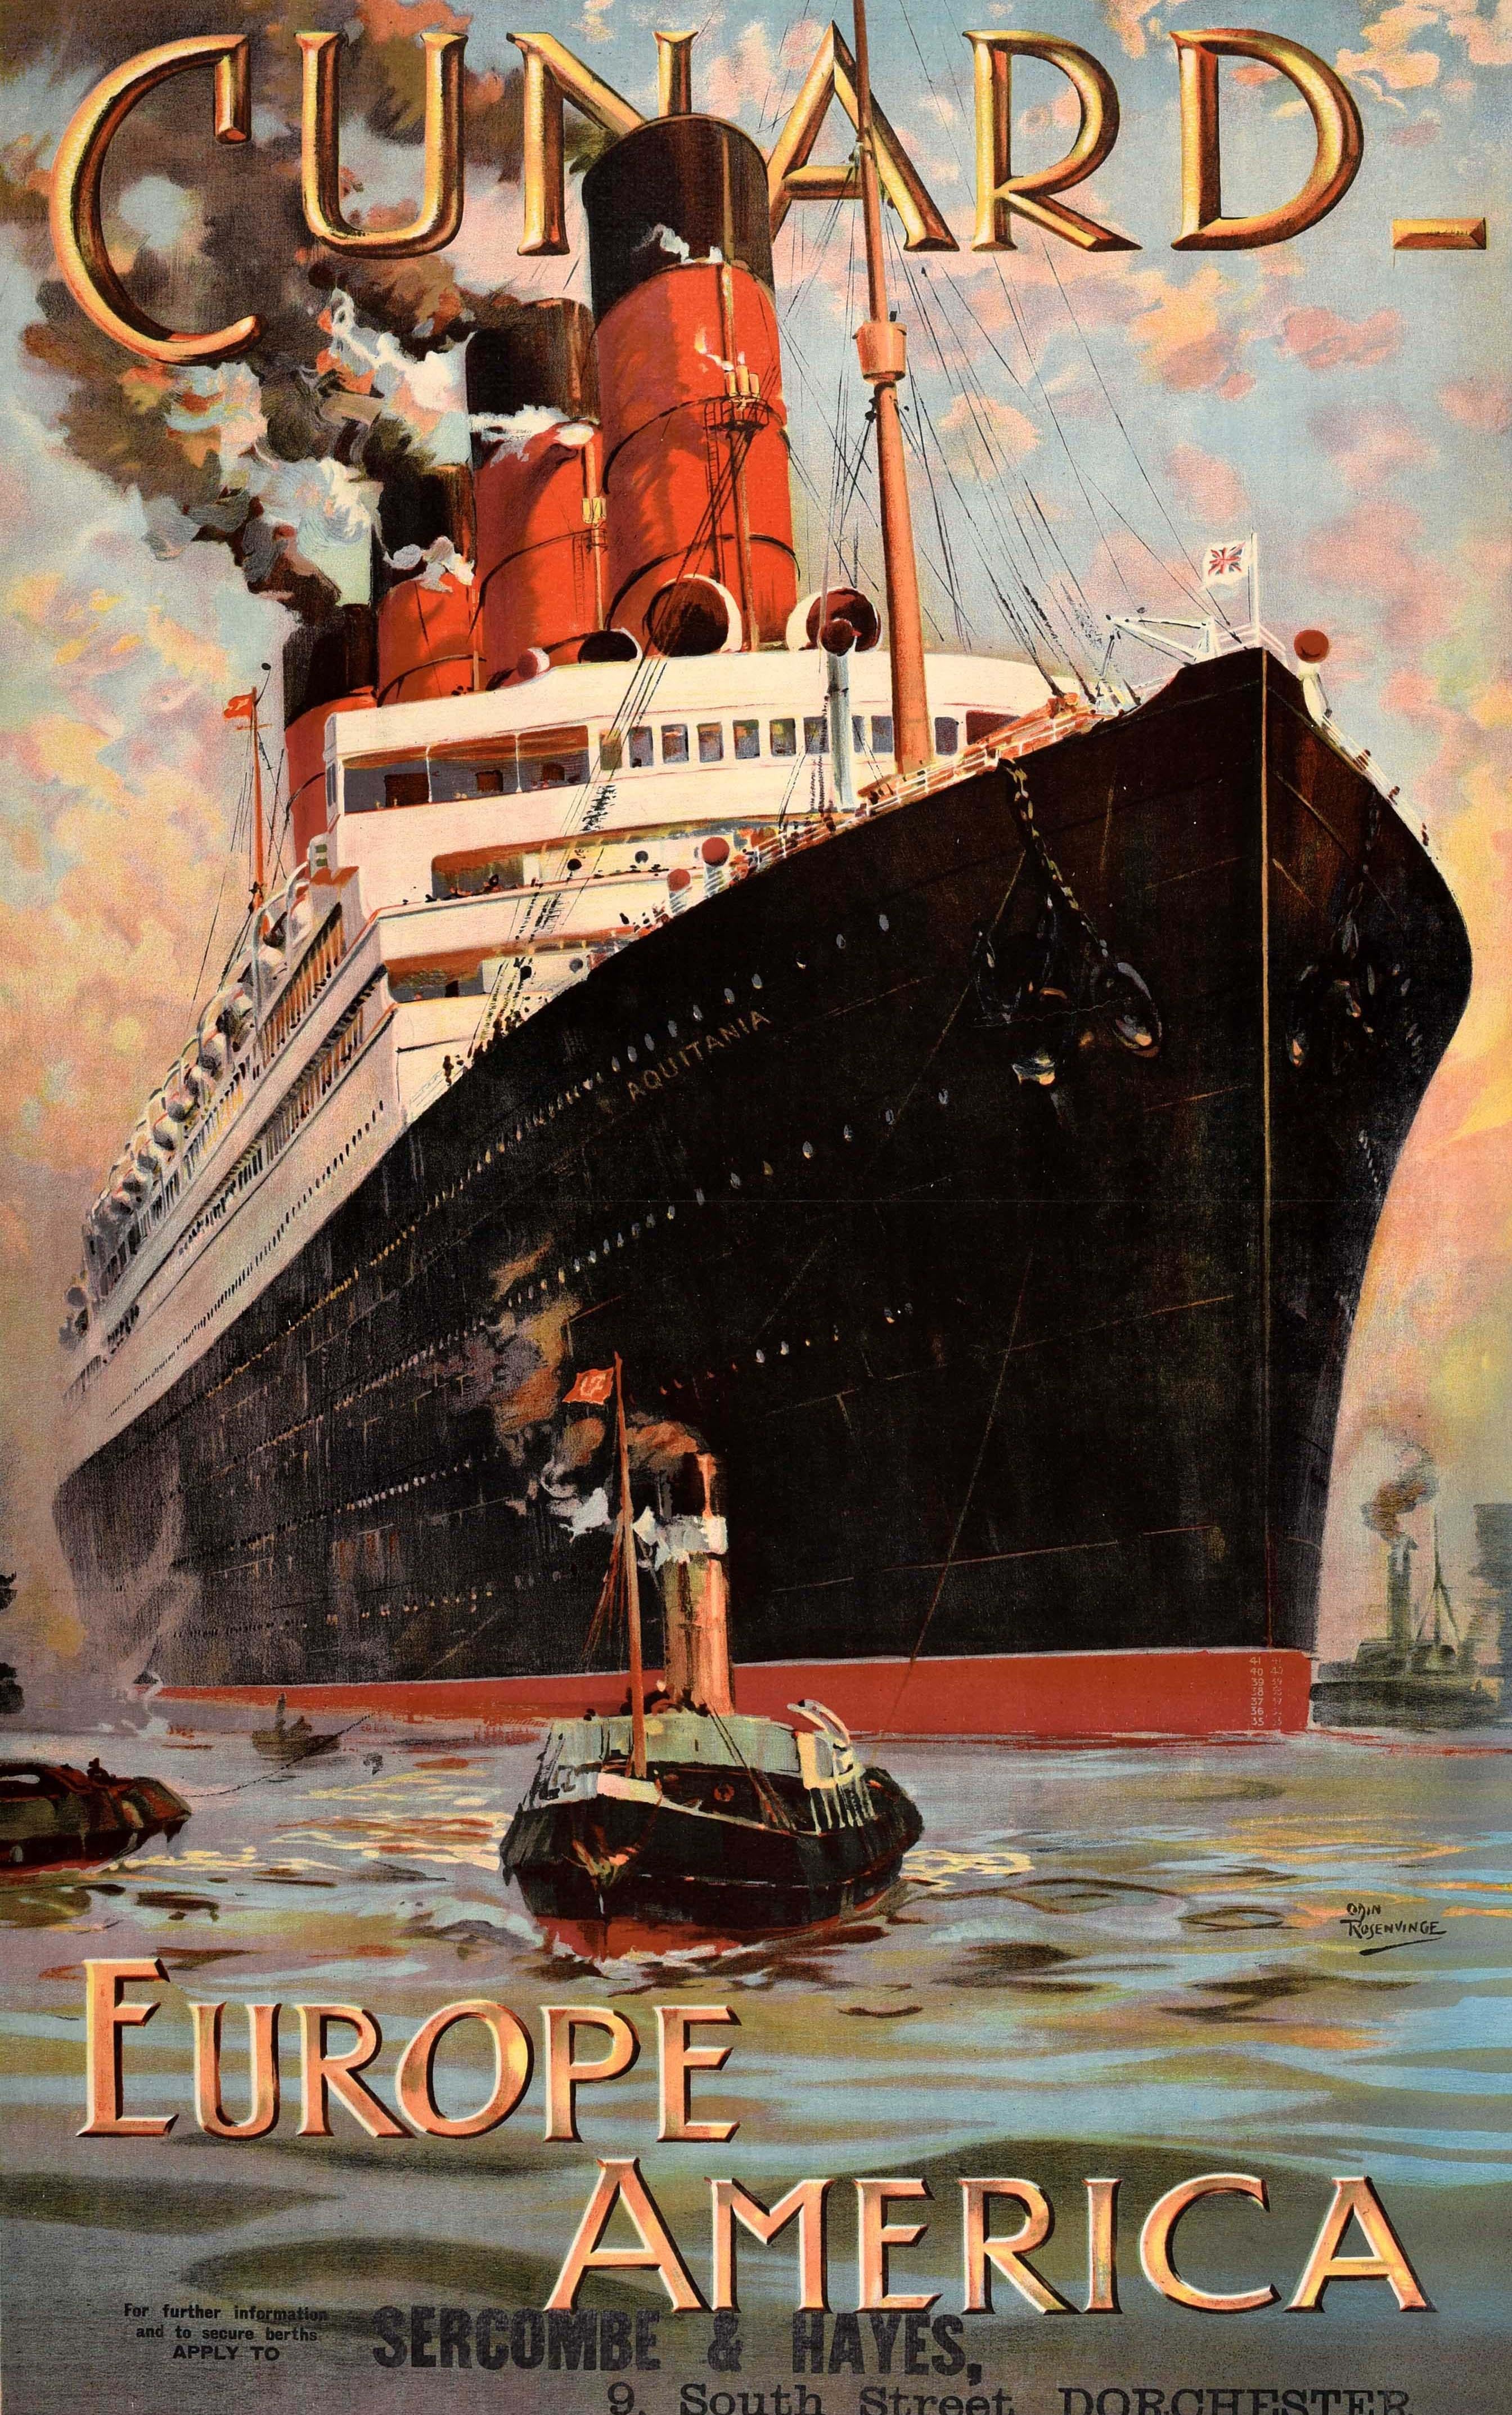 Original antique Cunard poster for their Europe America transatlantic cruise travel route featuring stunning artwork by Odin Rosenvinge (1880-1957) of the four-funneled ocean liner RMS Aquitania (1914-1950) sailing towards the viewer on a calm sea